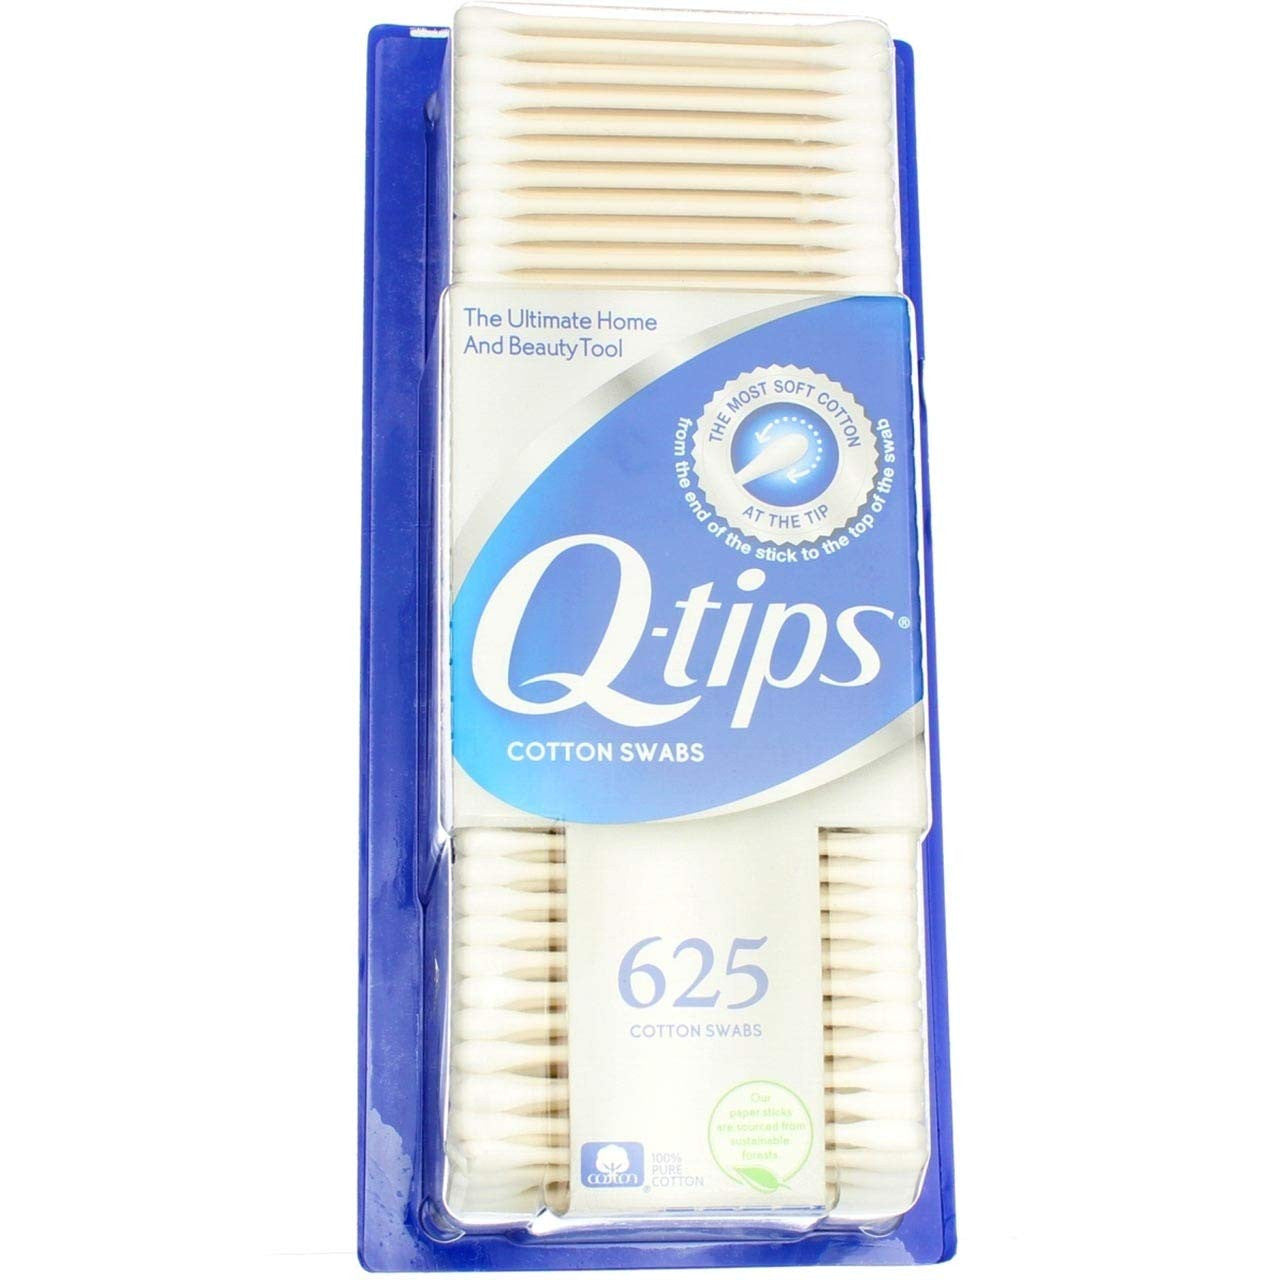 Q-Tips Cotton Swabs Travel Size Purse Pack 30 Swabs ea ( 2 pack )